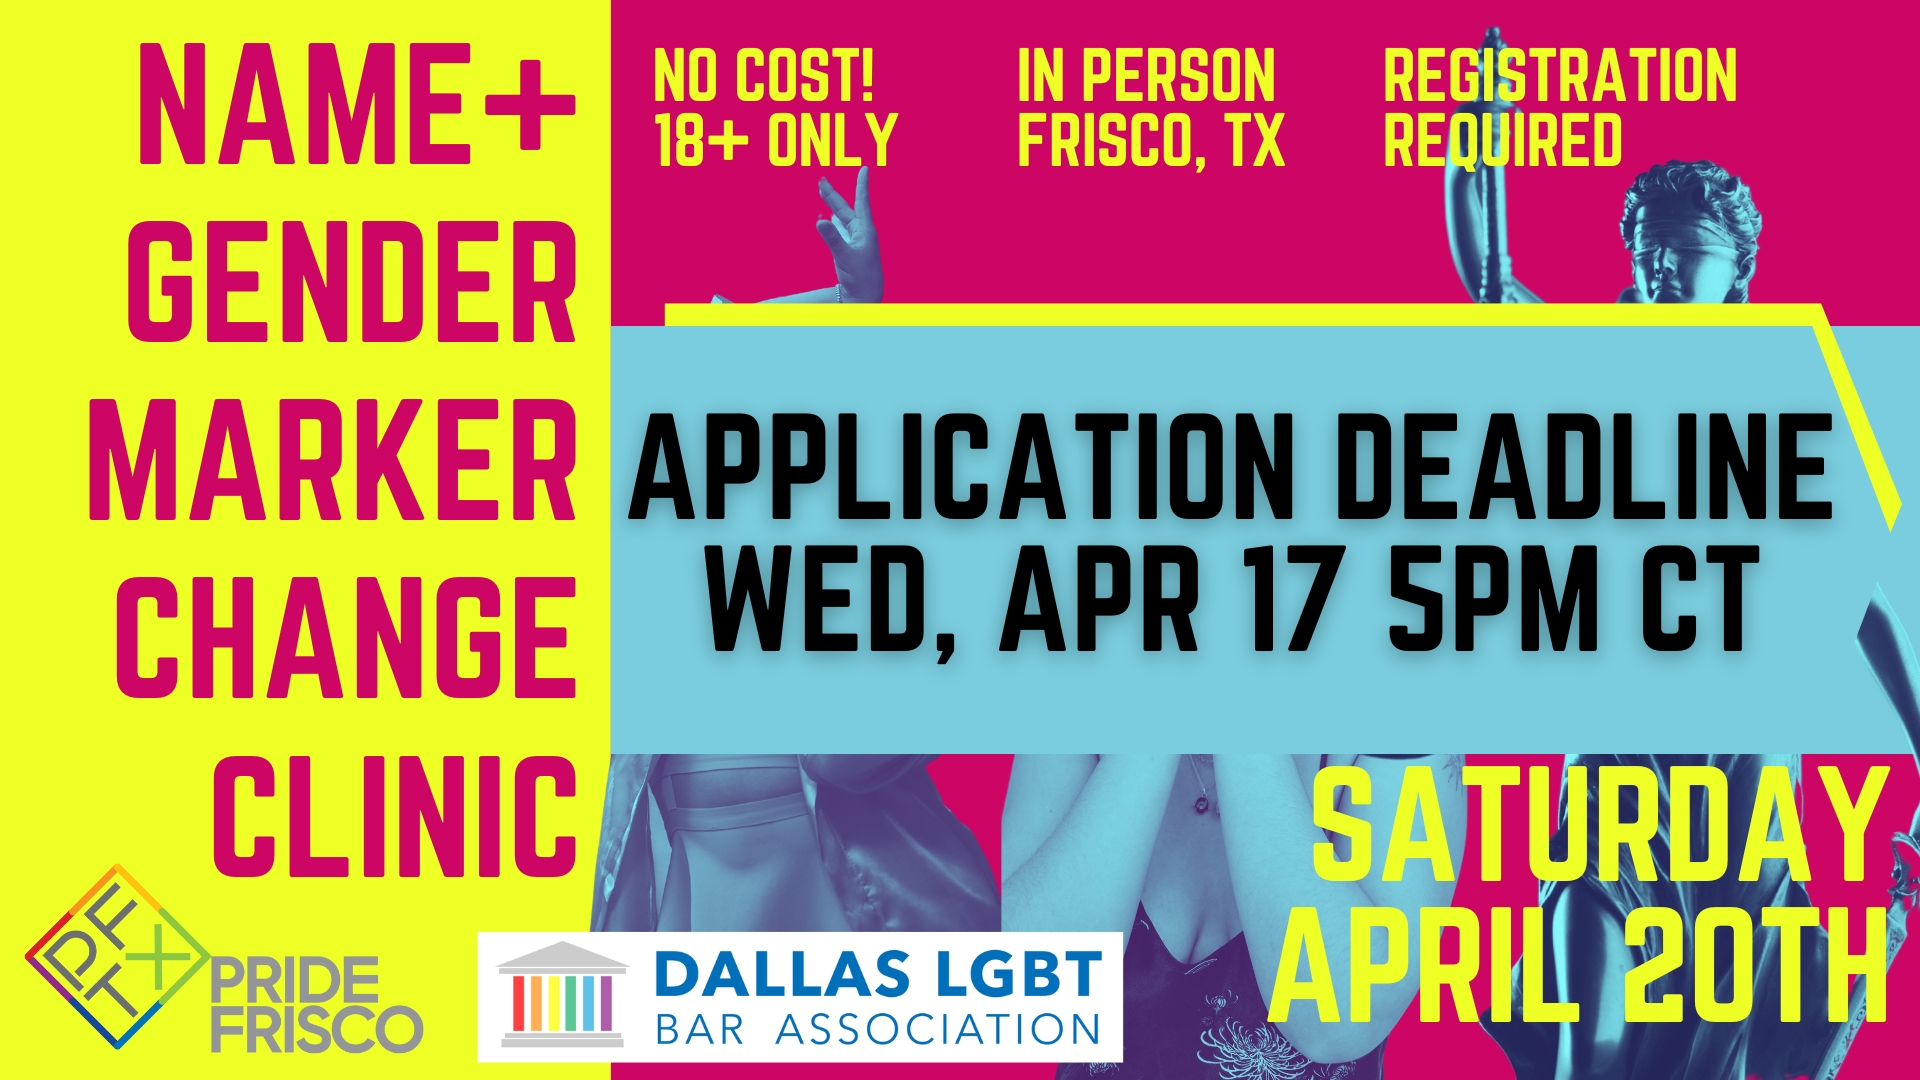 Name + Gender Marker Change Clinic (Dallas LGBT Bar Association in partnership with Pride Frisco) cover image